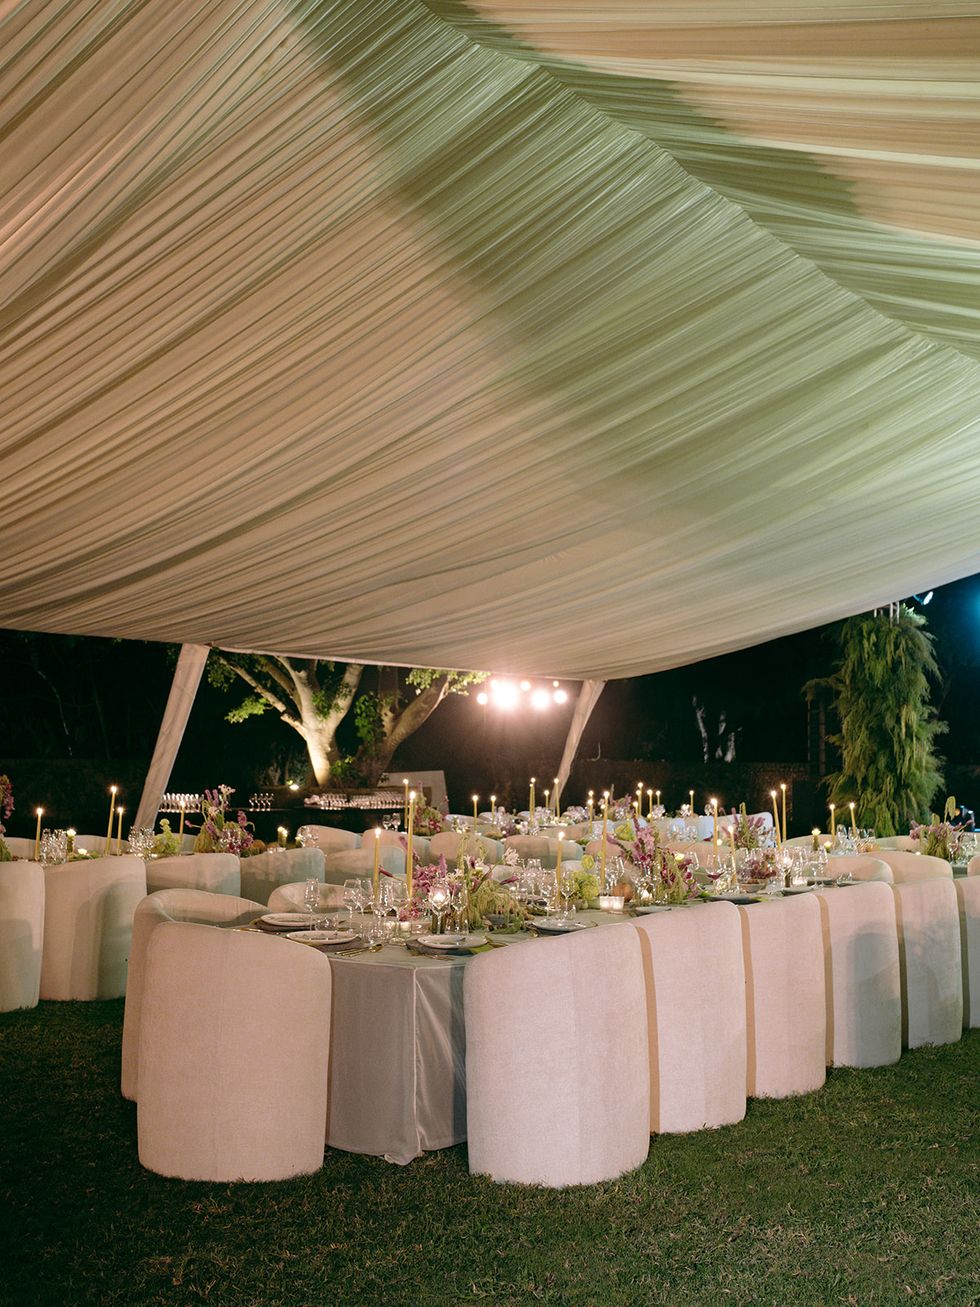 a set table with white cloths and white tables